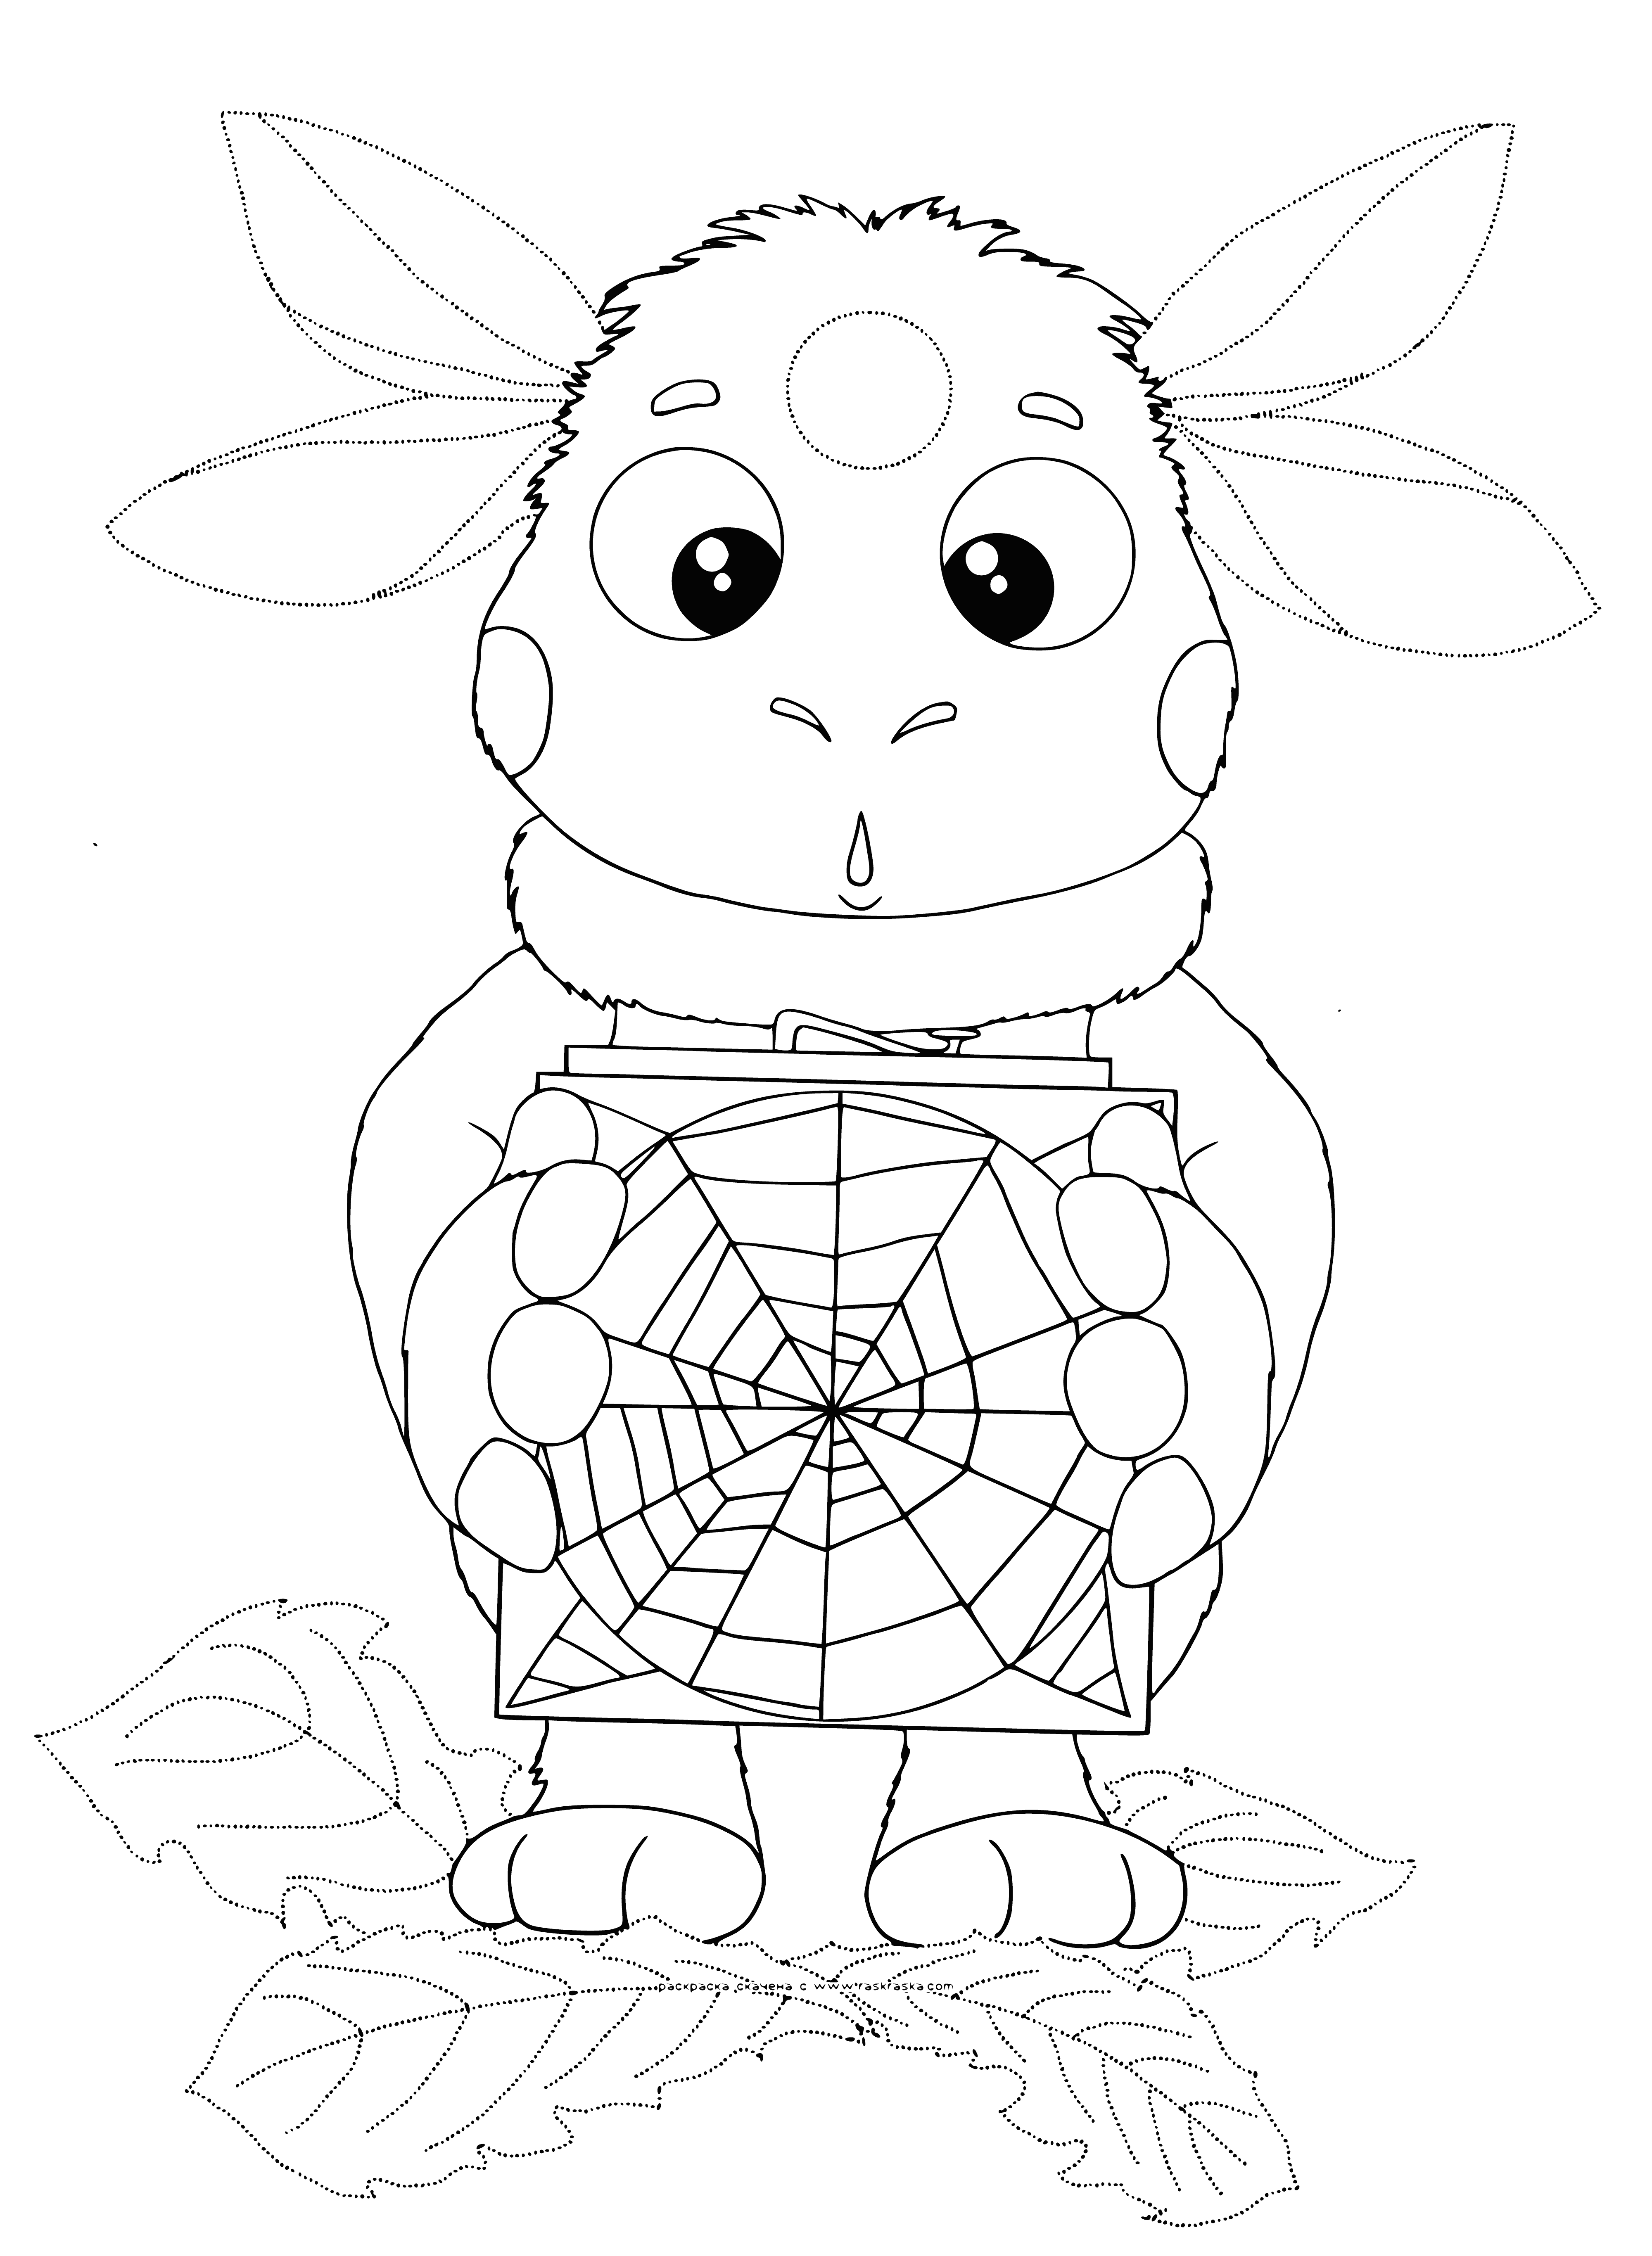 coloring page: Luntik and two friends: round noses, big eyes, furry ears & legs, long tails w/ bushy ends.